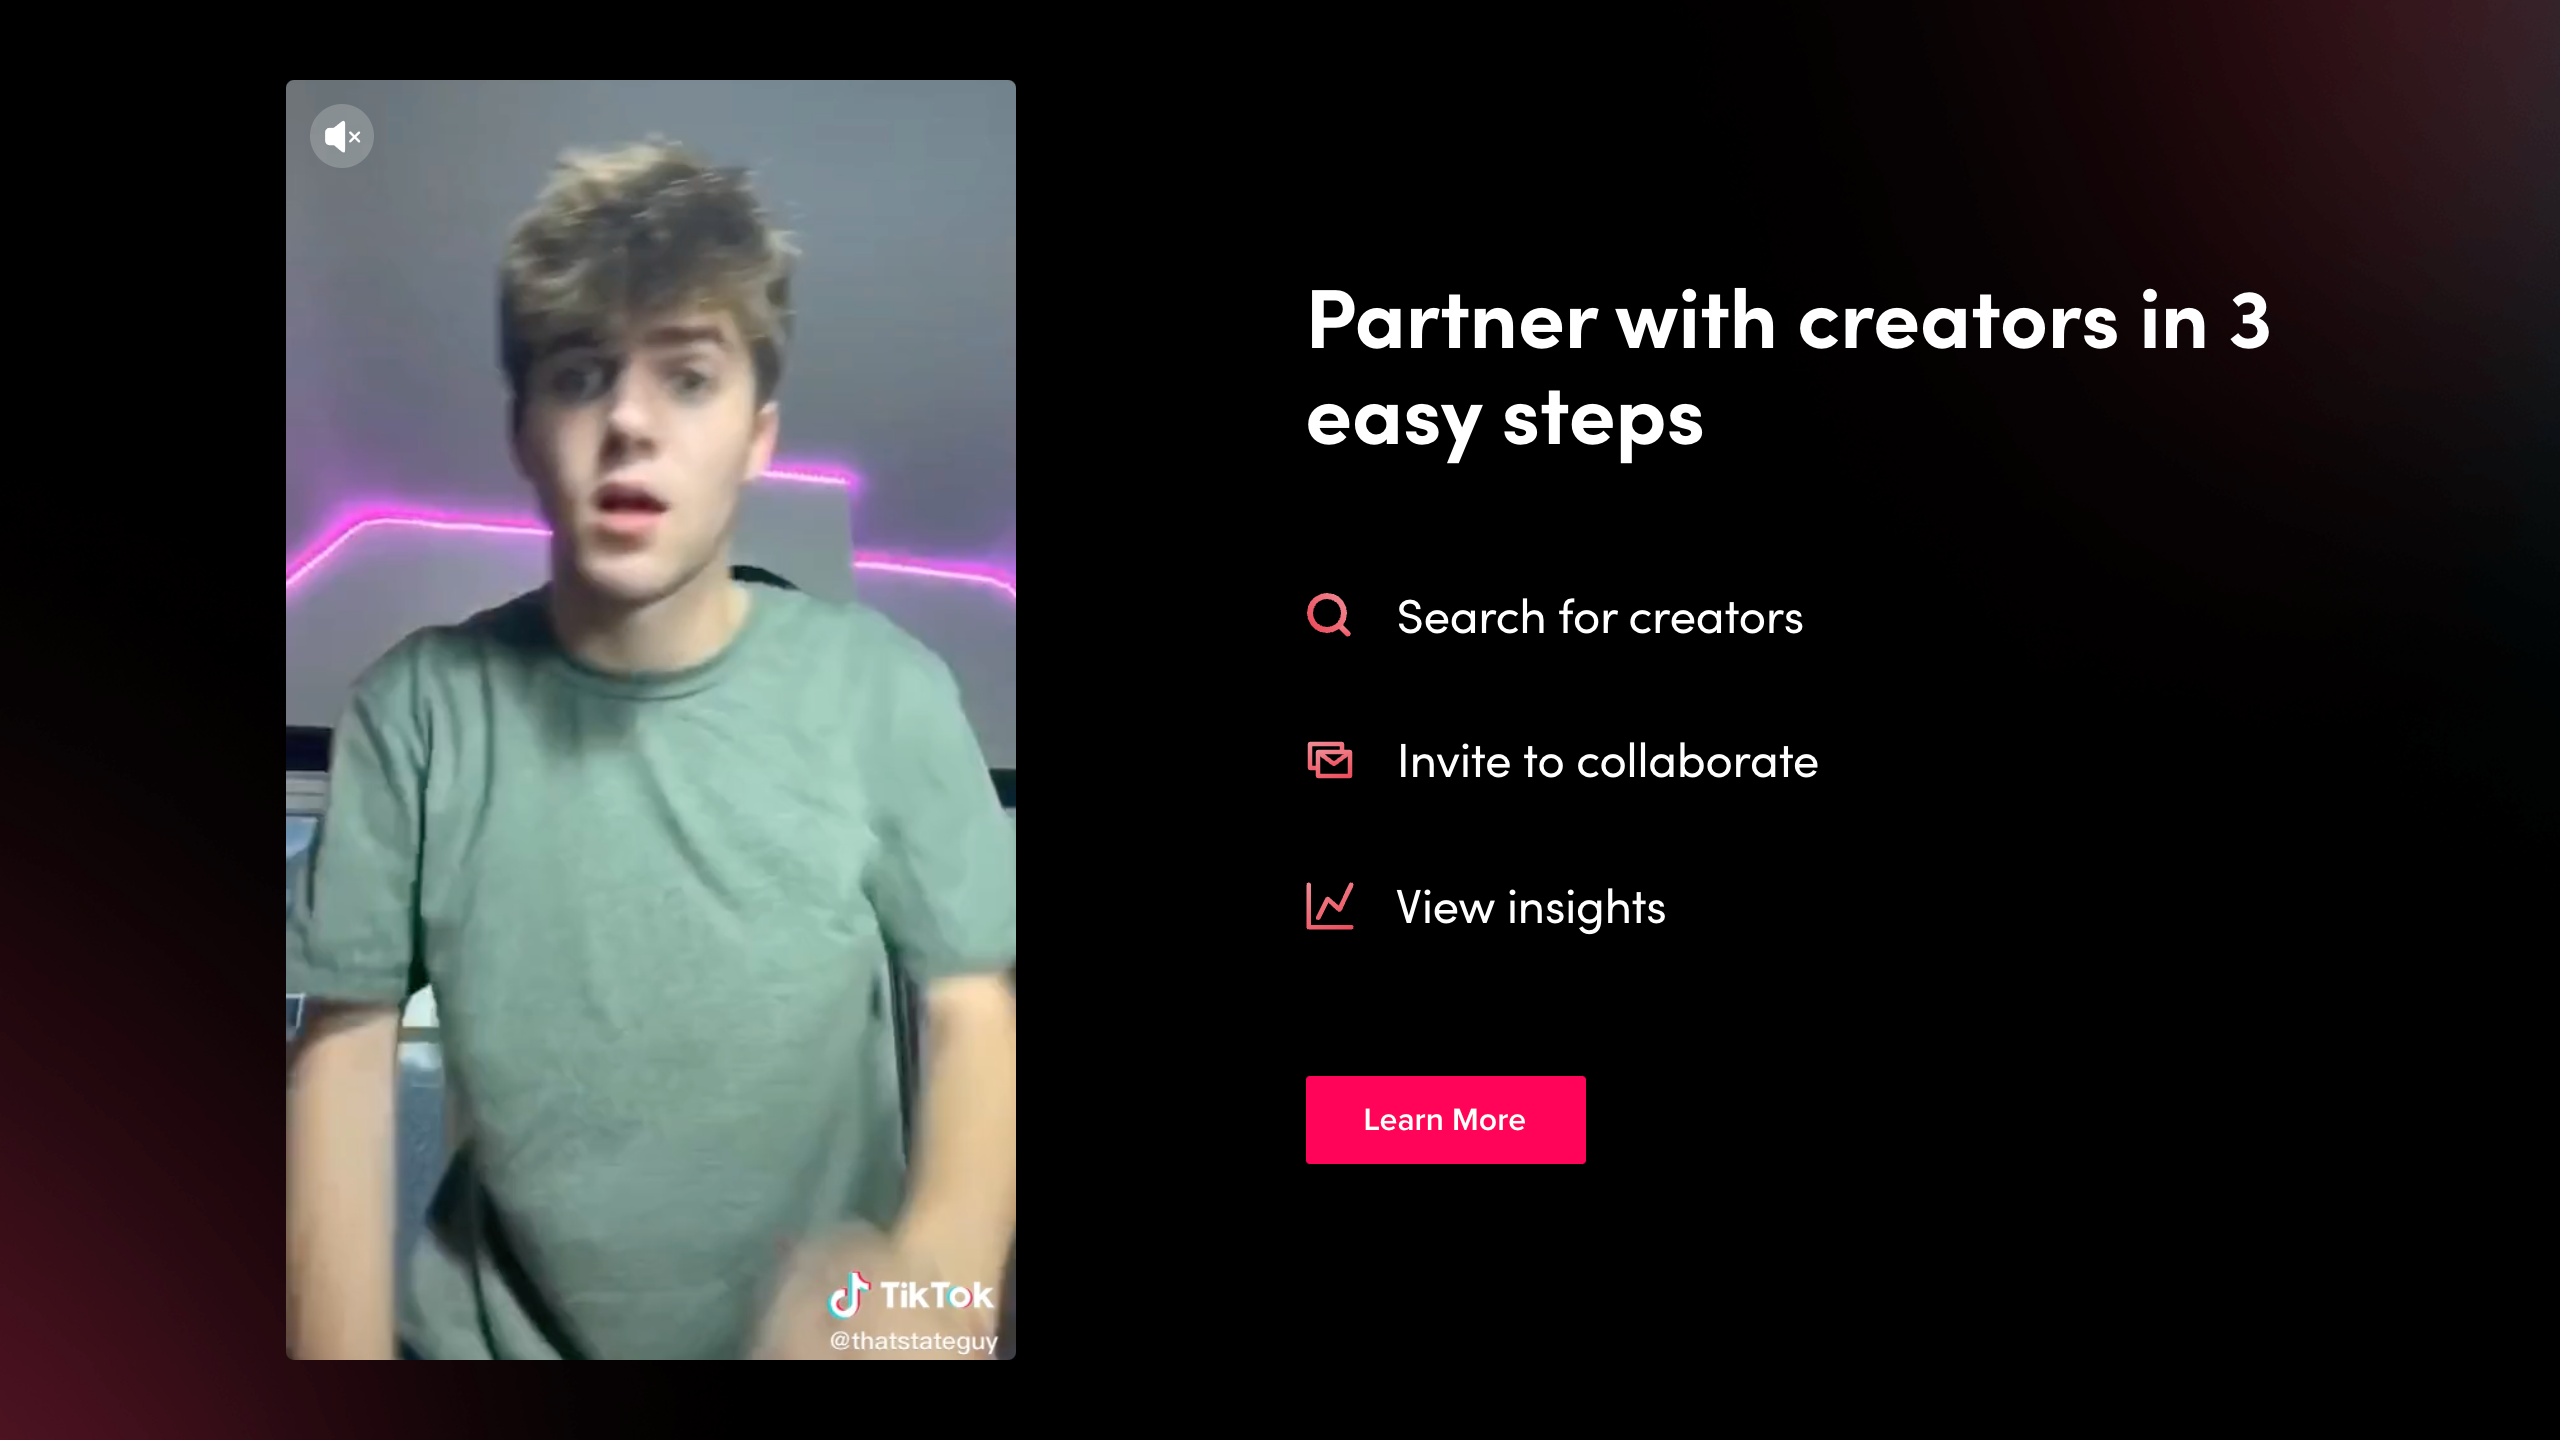 Partnering with Influencers - TikTok Marketplace